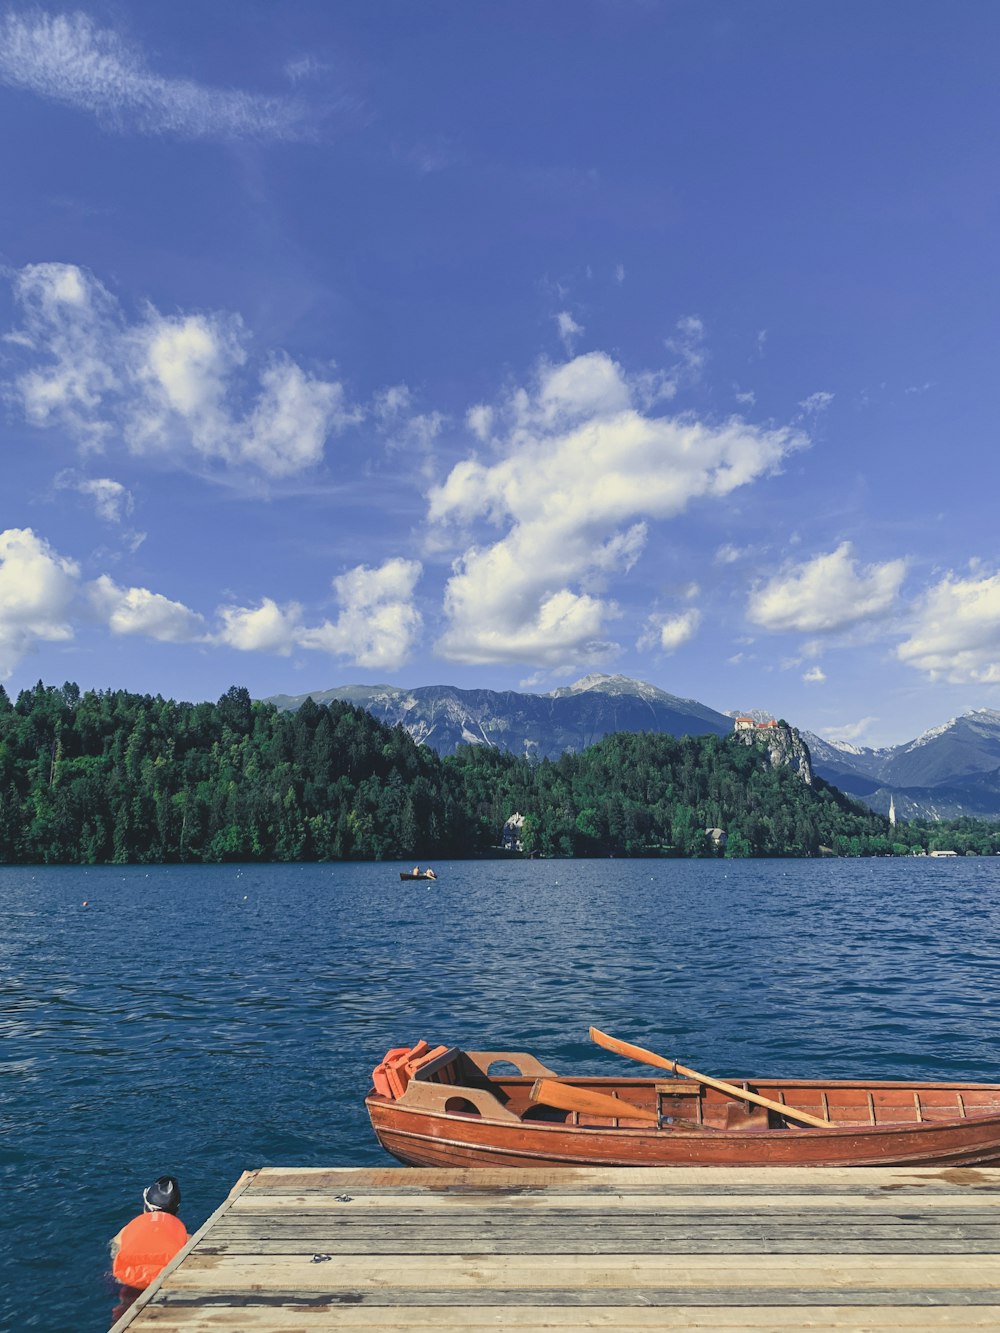 brown boat on body of water near green trees under blue sky during daytime